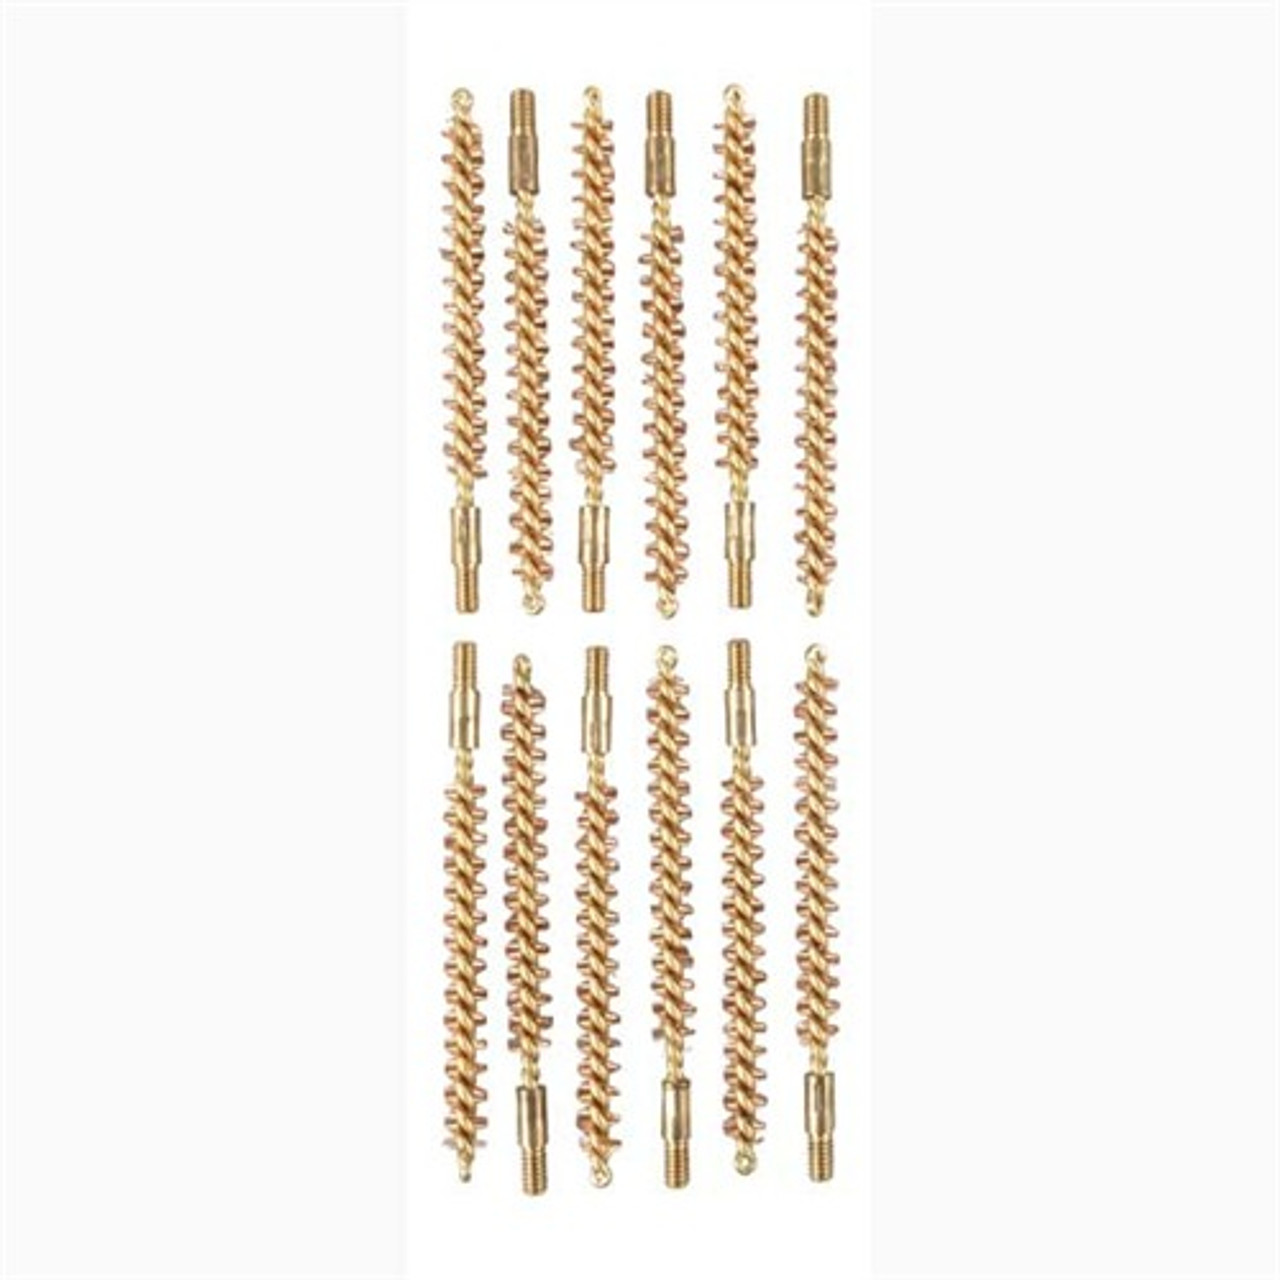 Brownells - 243/25 Caliber ''special Line'' Brass Rifle Brush 12 Pack